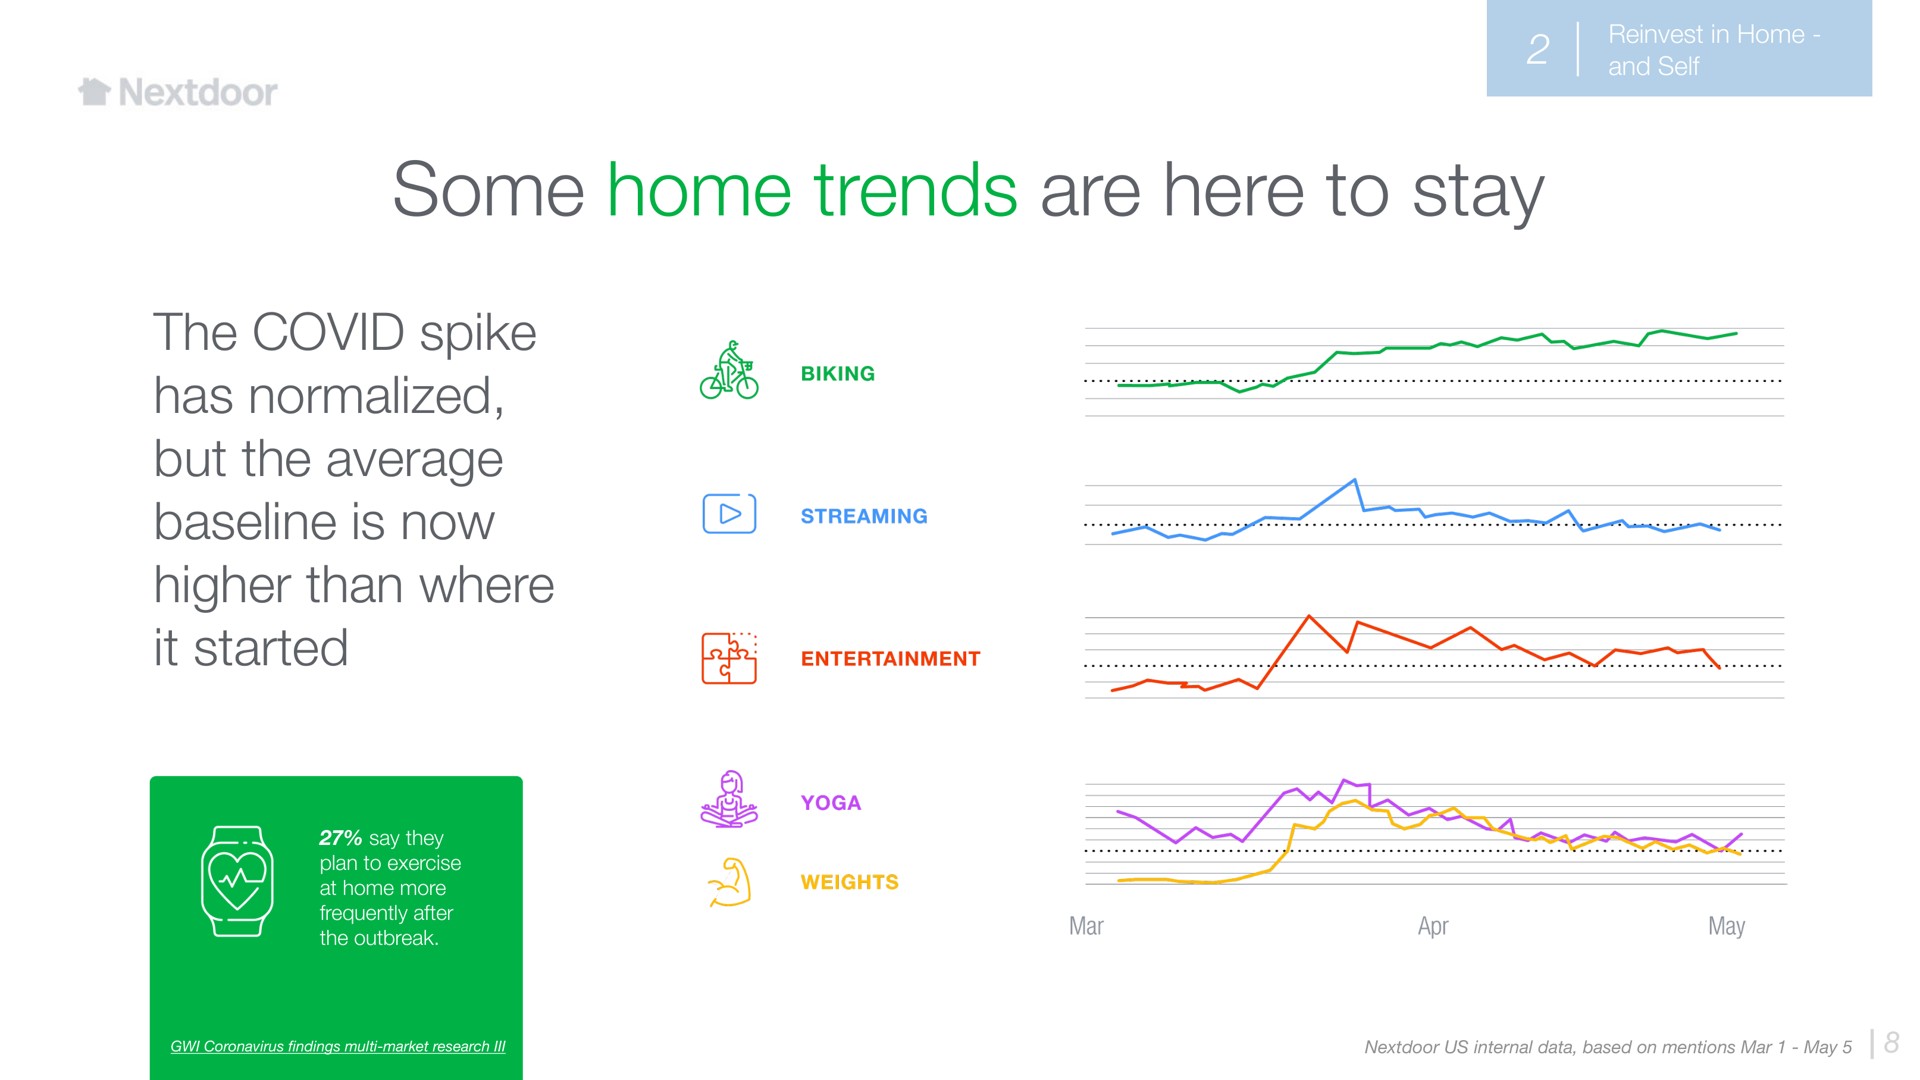 some home trends are here to stay the covid spike has normalized but the average is now higher than where it started | Nextdoor